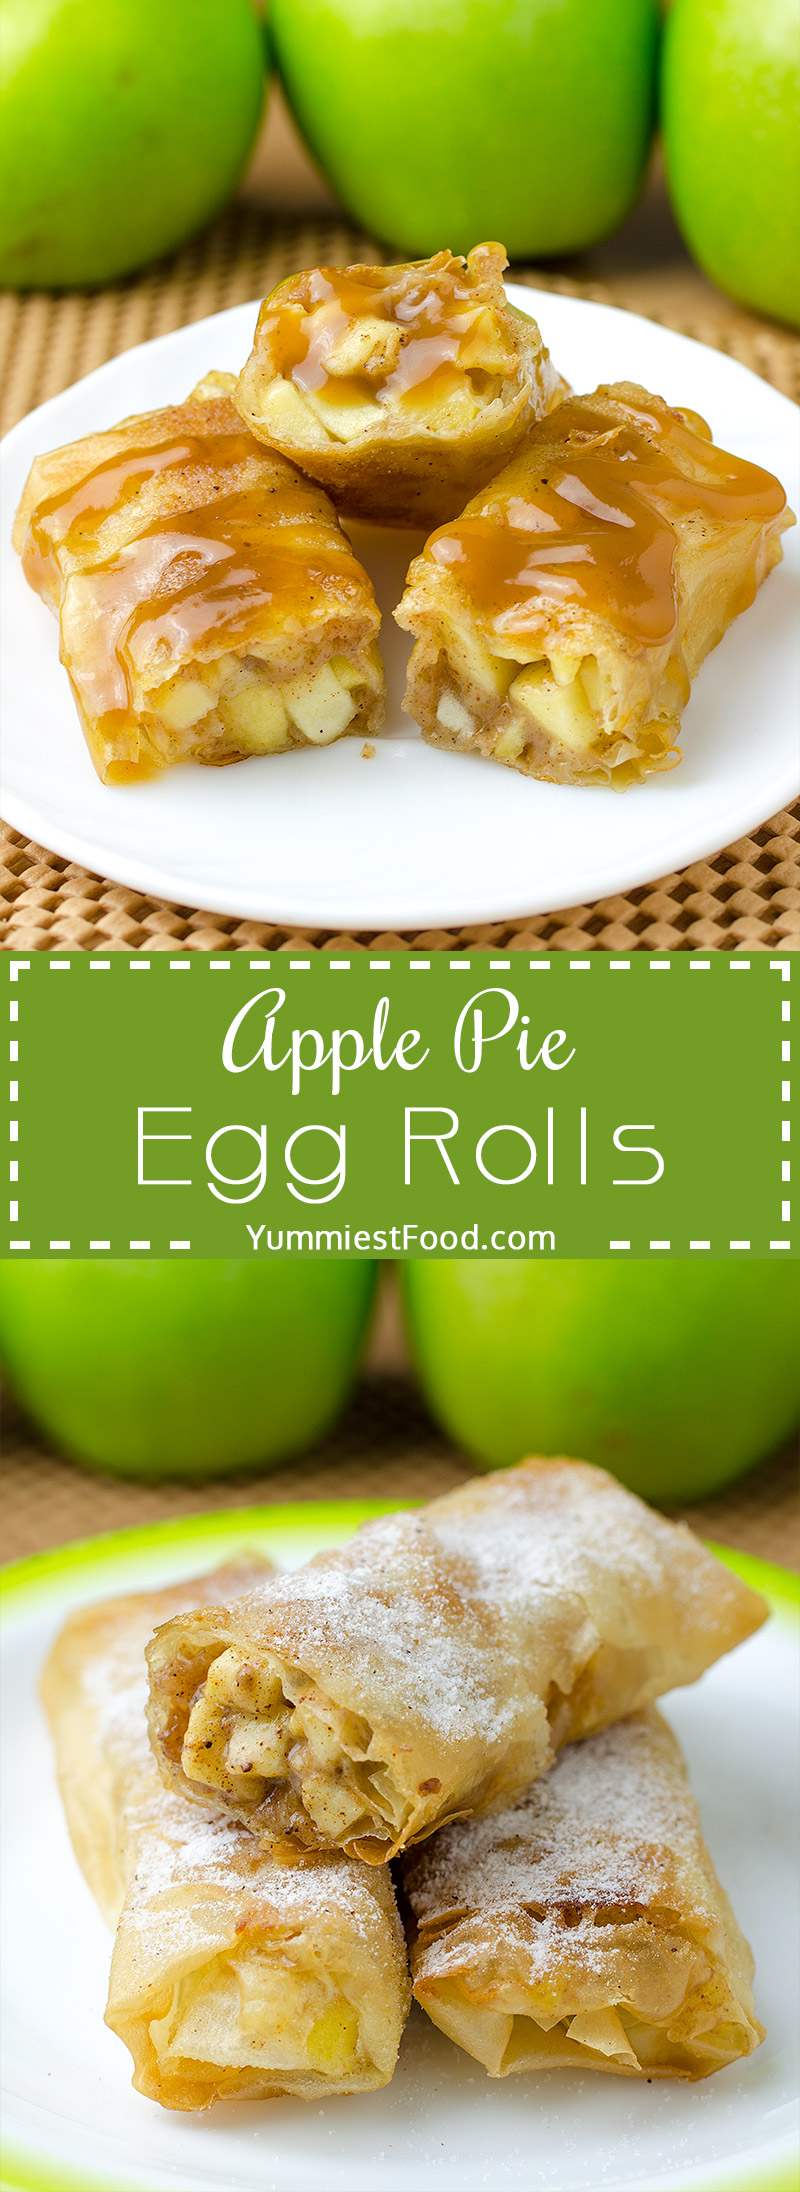 Apple Pie Egg Rolls - if you like apple and cinnamon combination, this recipe is perfect for you.